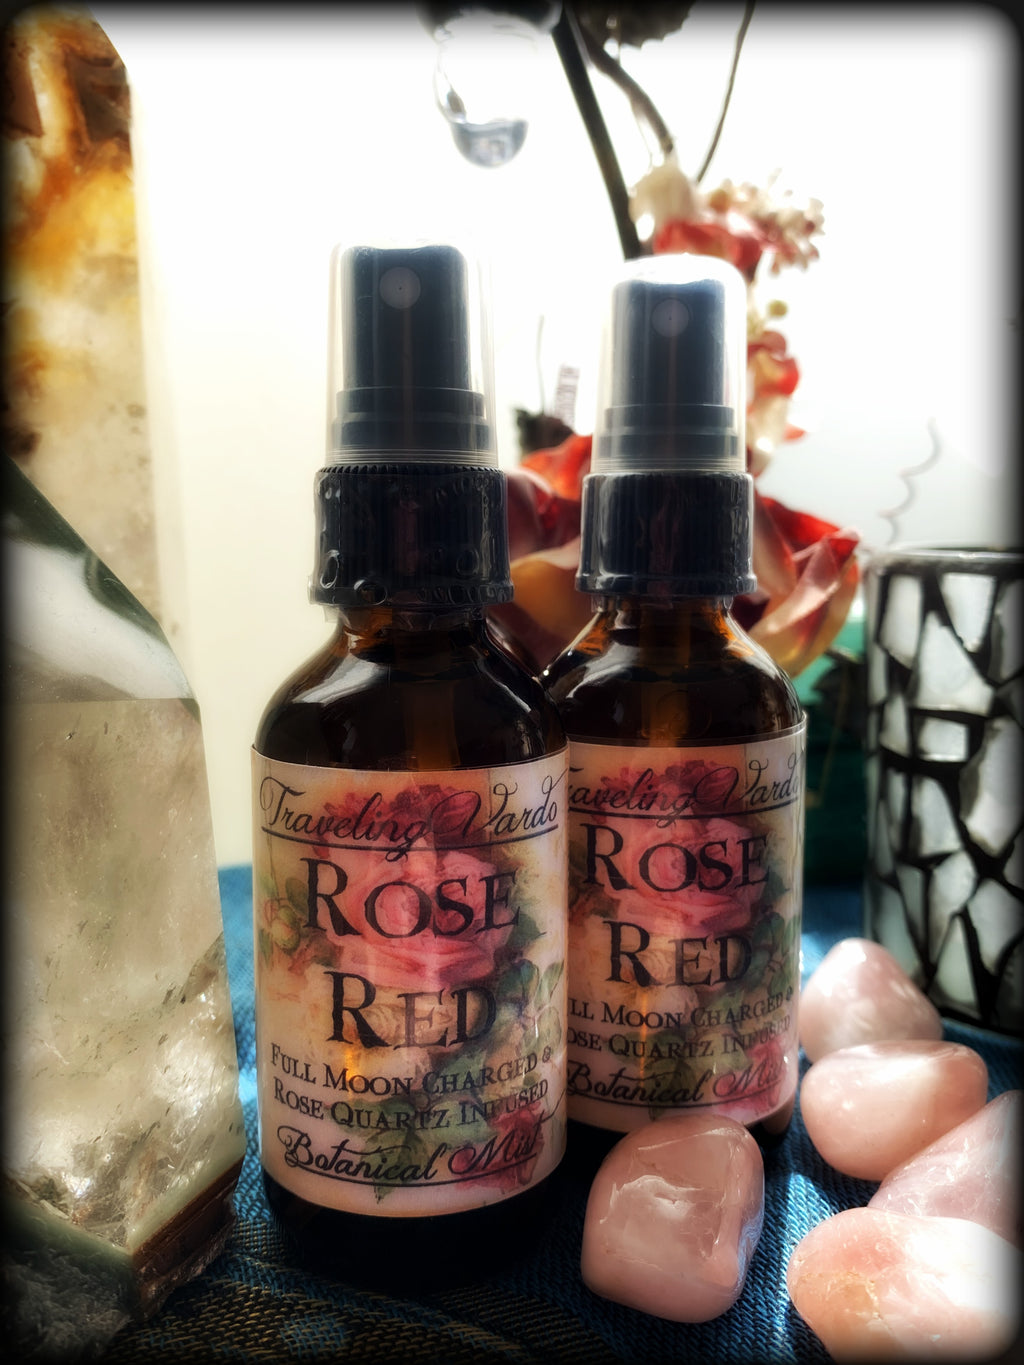 ROSE RED ~ Organic Magickal Rose Botanical Mist ~ Full Moon Charged and Rose Quartz Infused